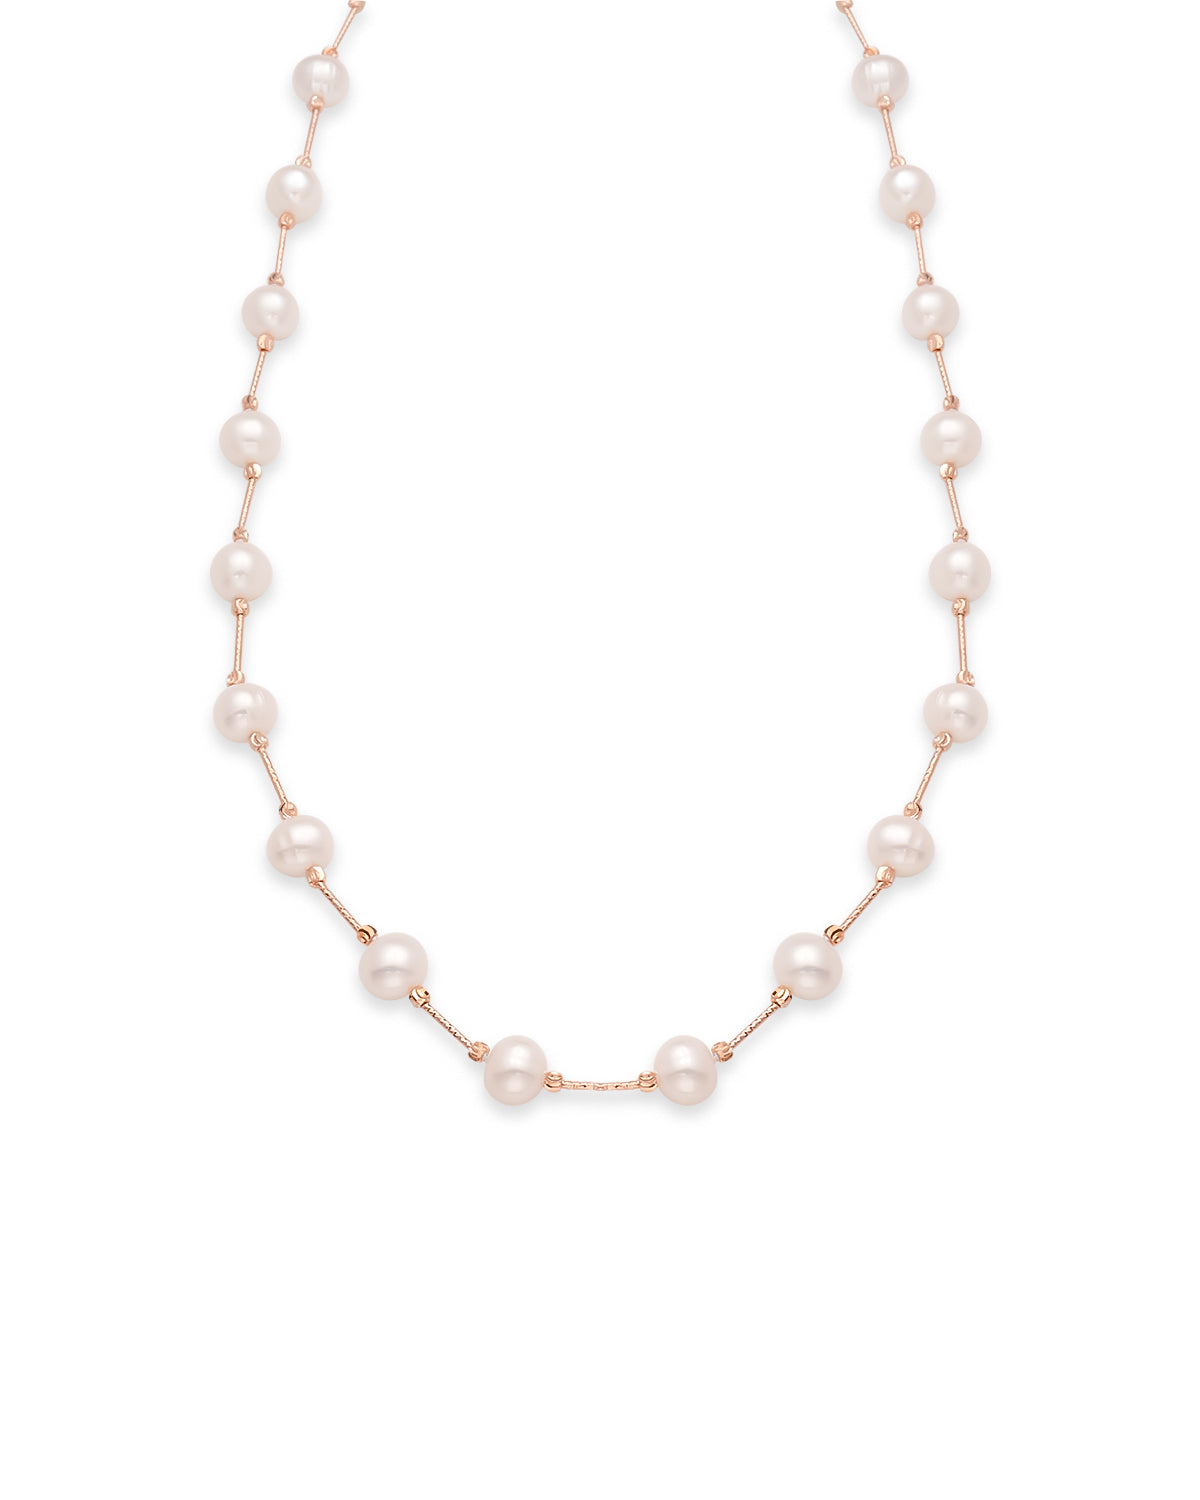 9mm White Freshwater Pearl Tincup Necklace